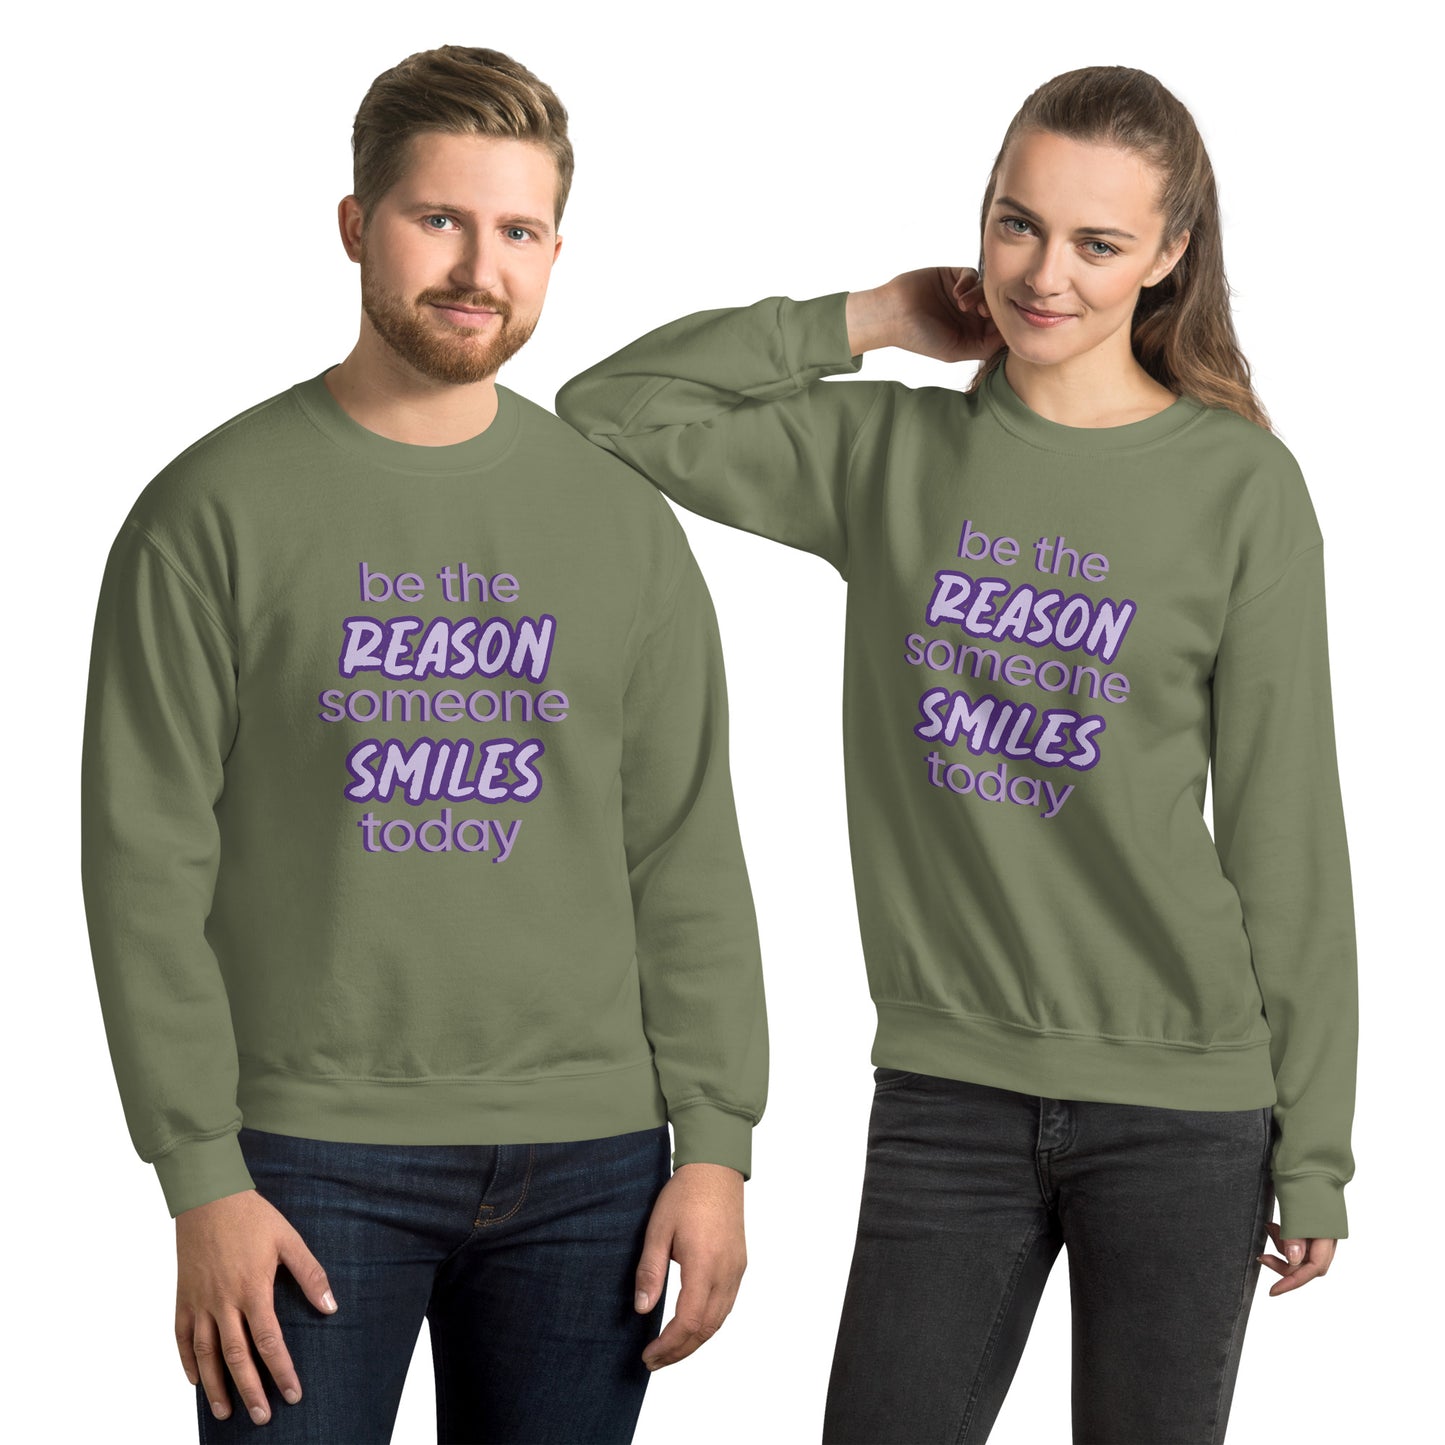 Men and women with military green sweater and the quote "be the reason someone smiles today" in purple on it. 